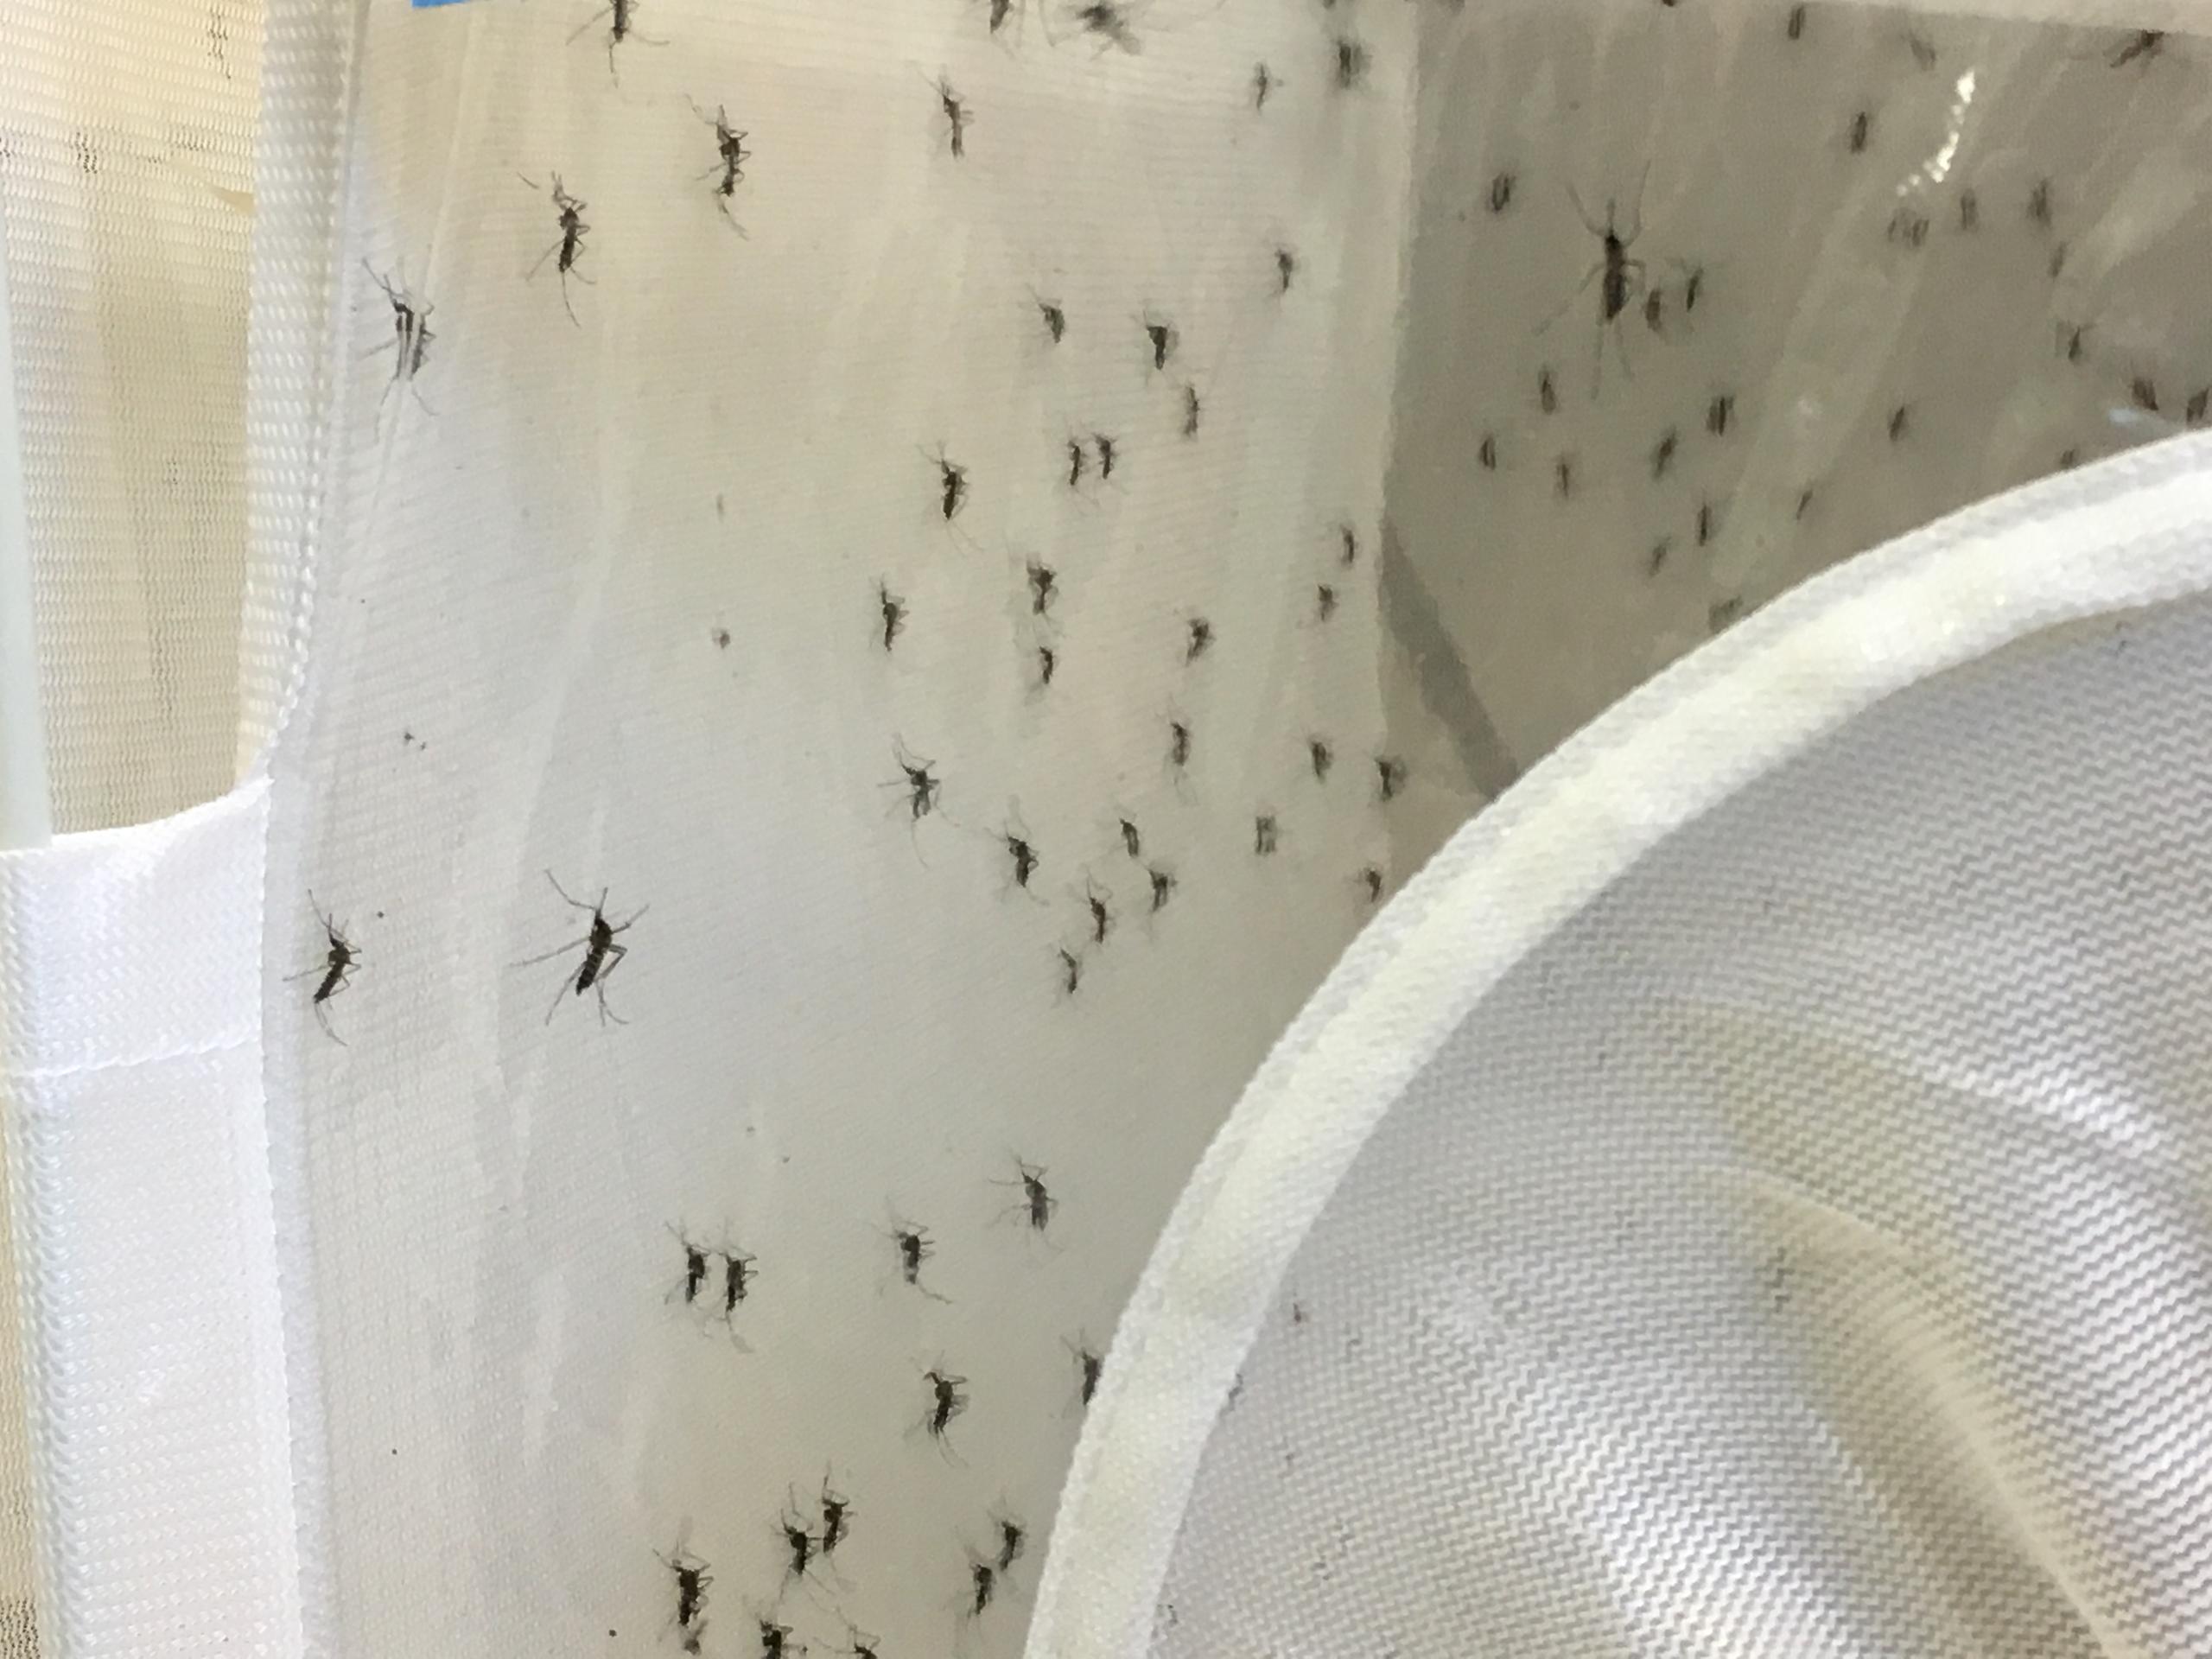 Aedes japonicus mosquitos cling to mosquito netting in a Zurich laboratory